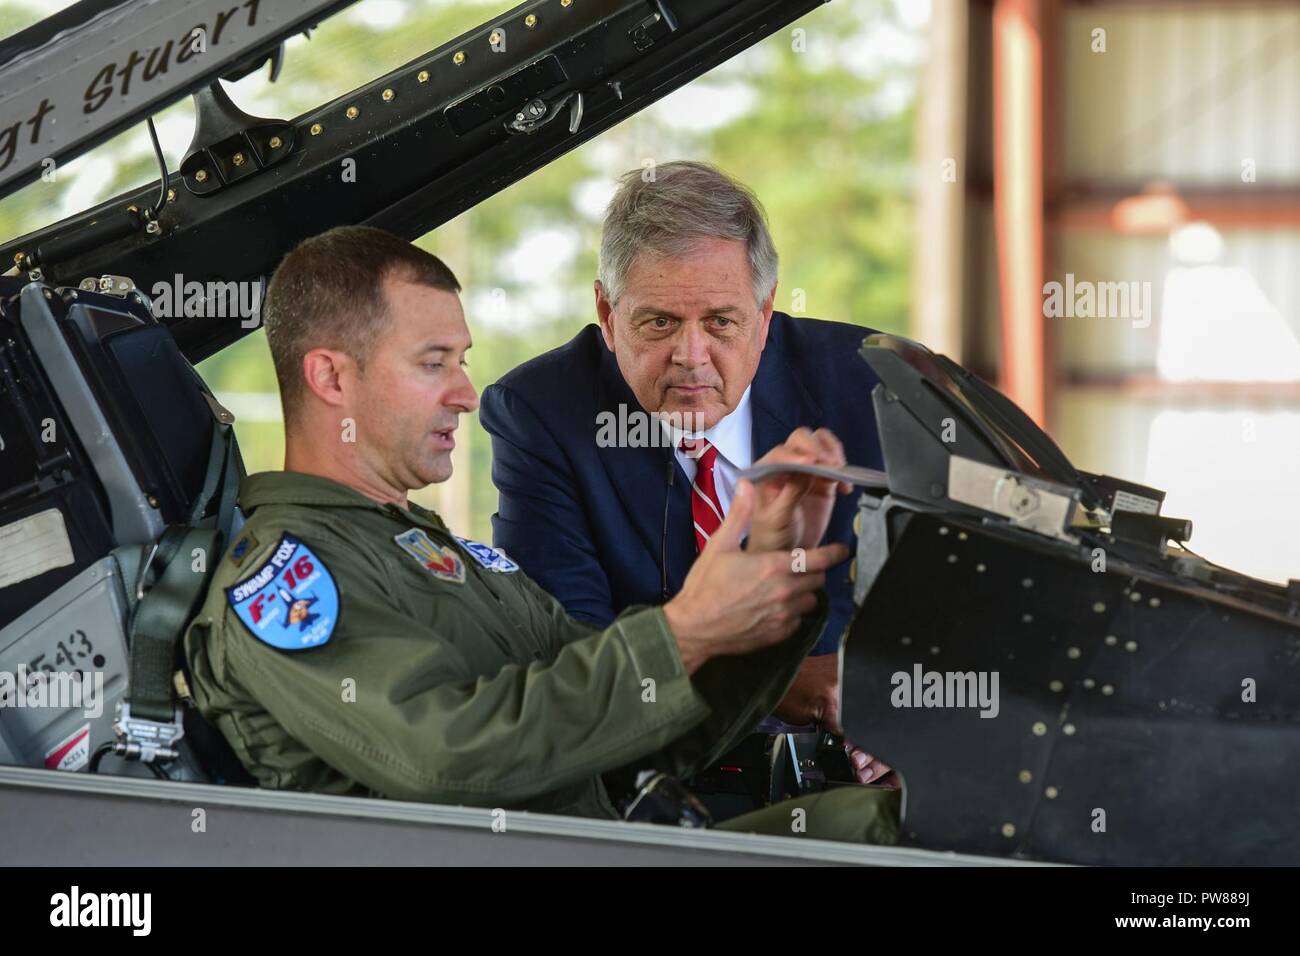 U.S. Air Force Lt. Col. Jeff Beckham, a fighter pilot assigned to the 157th Fighter Squadron, shows U.S. Congressman Ralph Norman, the District 5 representative for the state of South Carolina, the cockpit of an F--16 Fighting Falcon fighter jet during a visit to the South Carolina Air National Guard’s 169th Fighter Wing at McEntire Joint National Guard Base, S.C., Sept. 20, 2017. Norman toured facilities on the base and spoke with leadership about the capabilities of the SCANG. Stock Photo